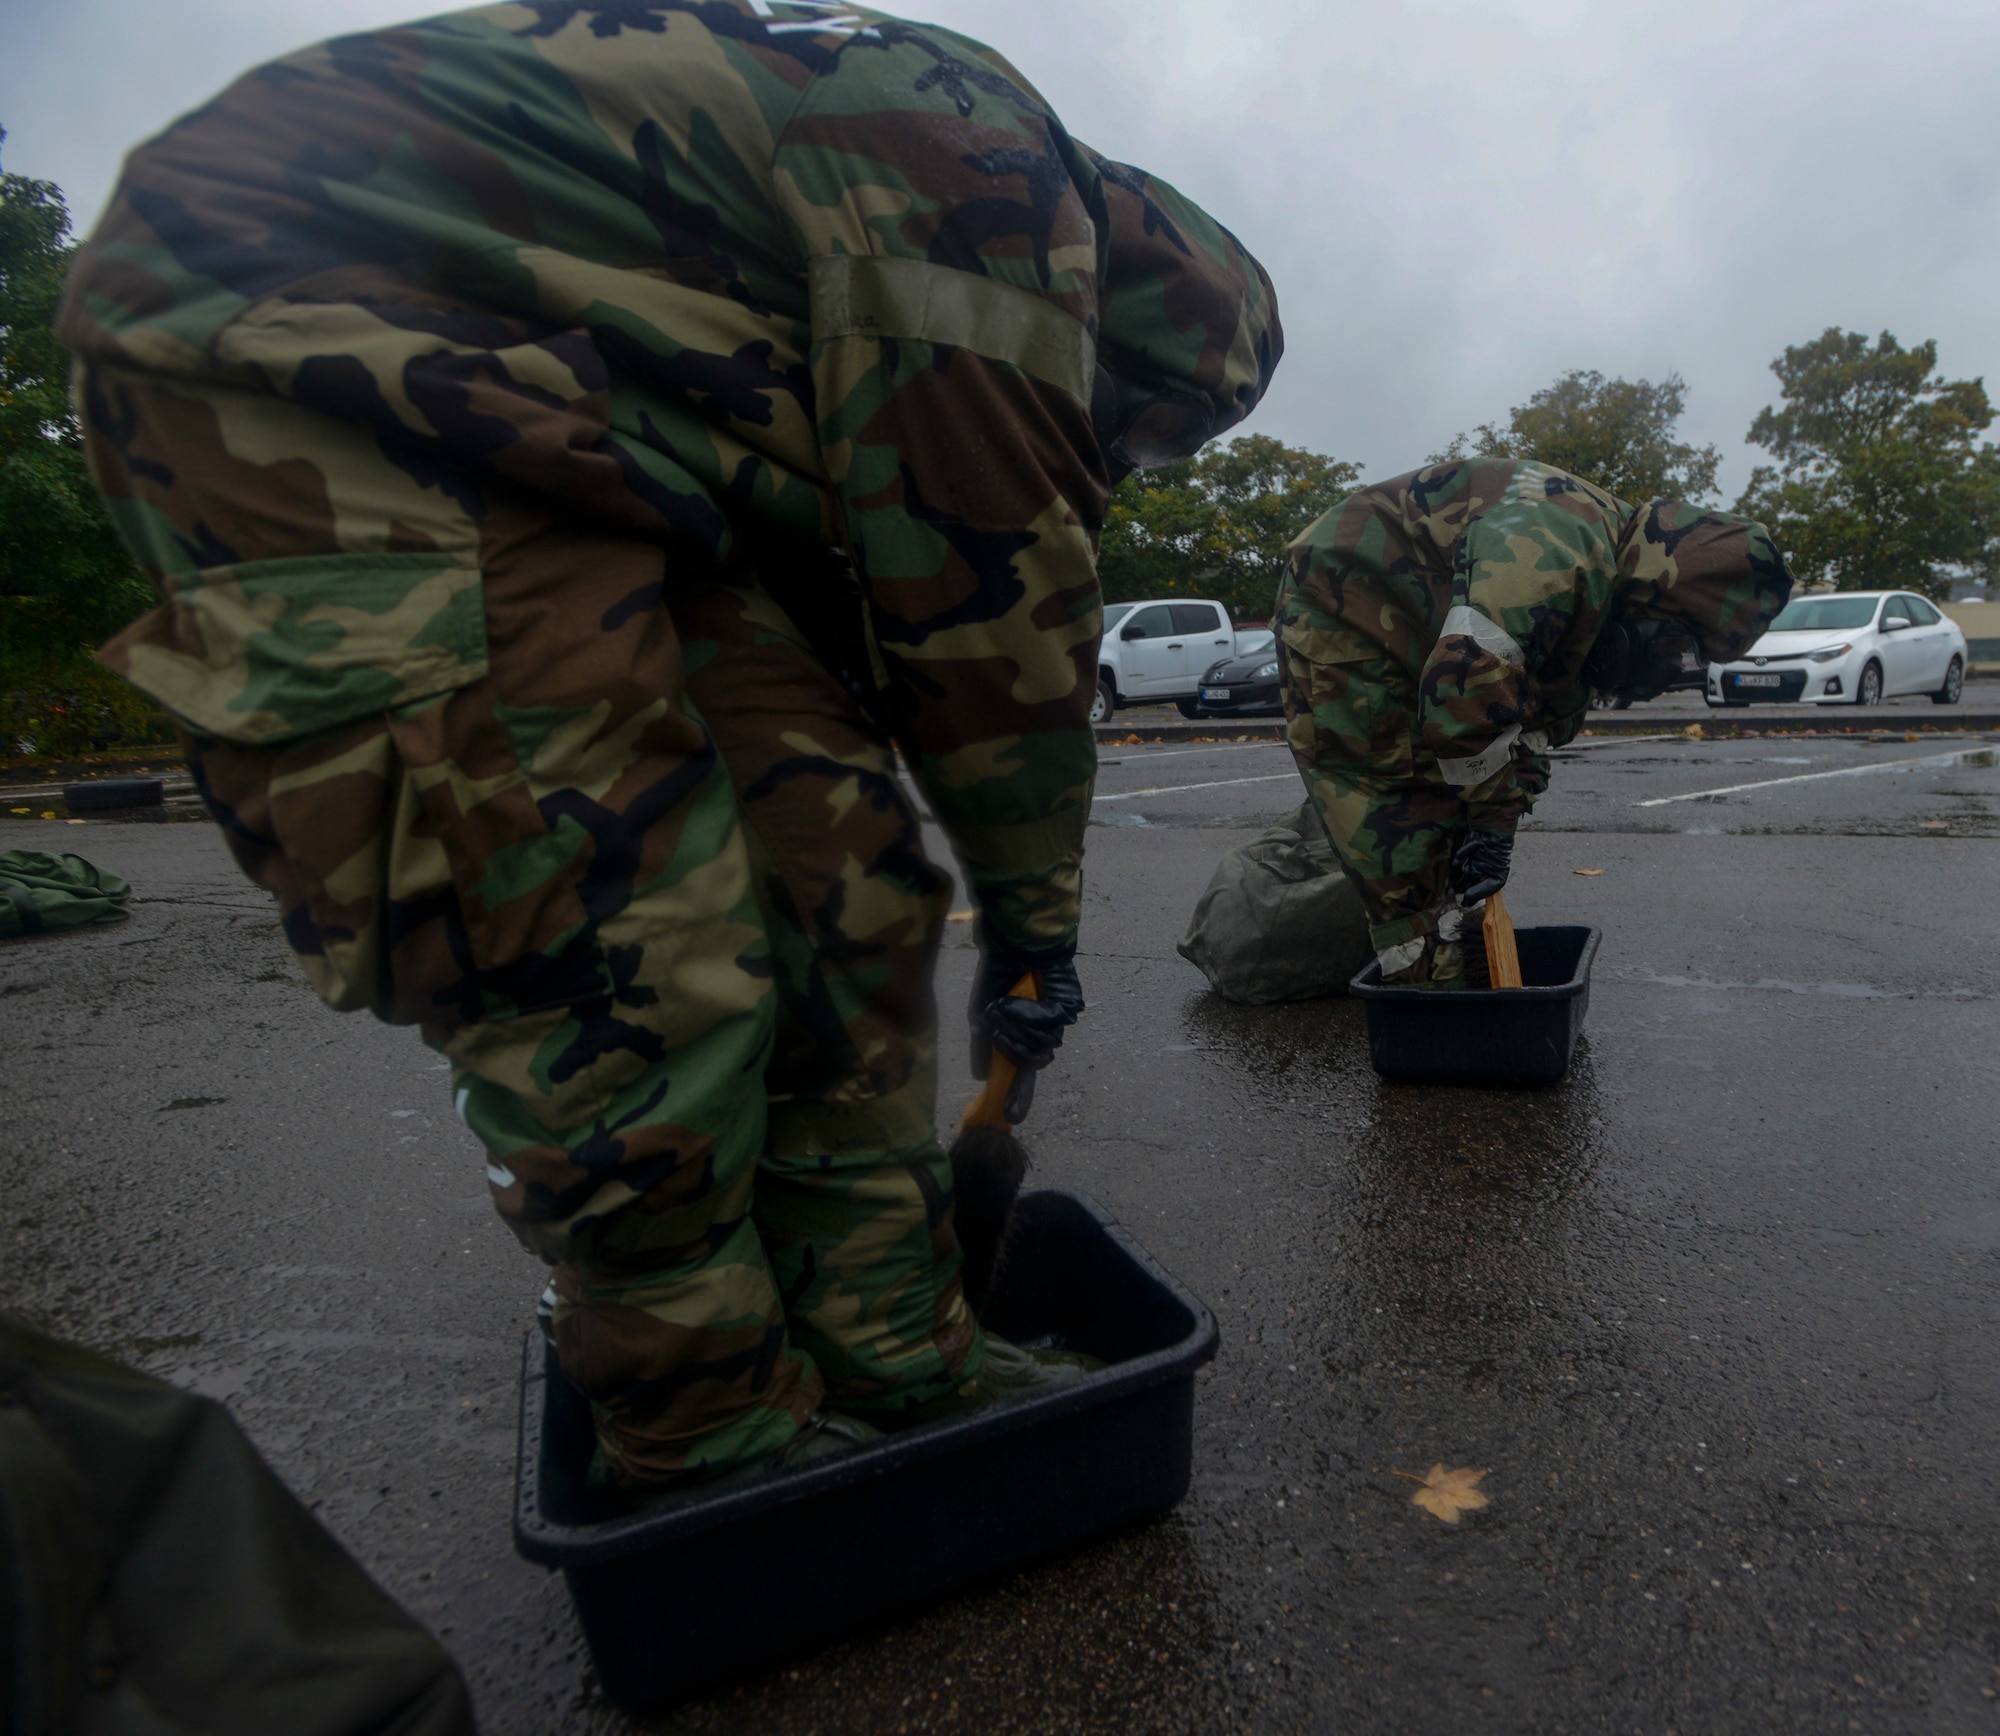 U.S. Airmen simulate scrubbing the boots of their mission-oriented protective posture gear as part of Operation Varsity 19-03 at Ramstein Air Base, Germany, Sept. 27, 2019. Airmen assigned to both the 86th Airlift Wing and 521st Air Mobility Operations Wing simulated decontaminating their equipment to become more familiar with the process. (U.S. Air Force photo by Tech. Sgt. Timothy Moore)